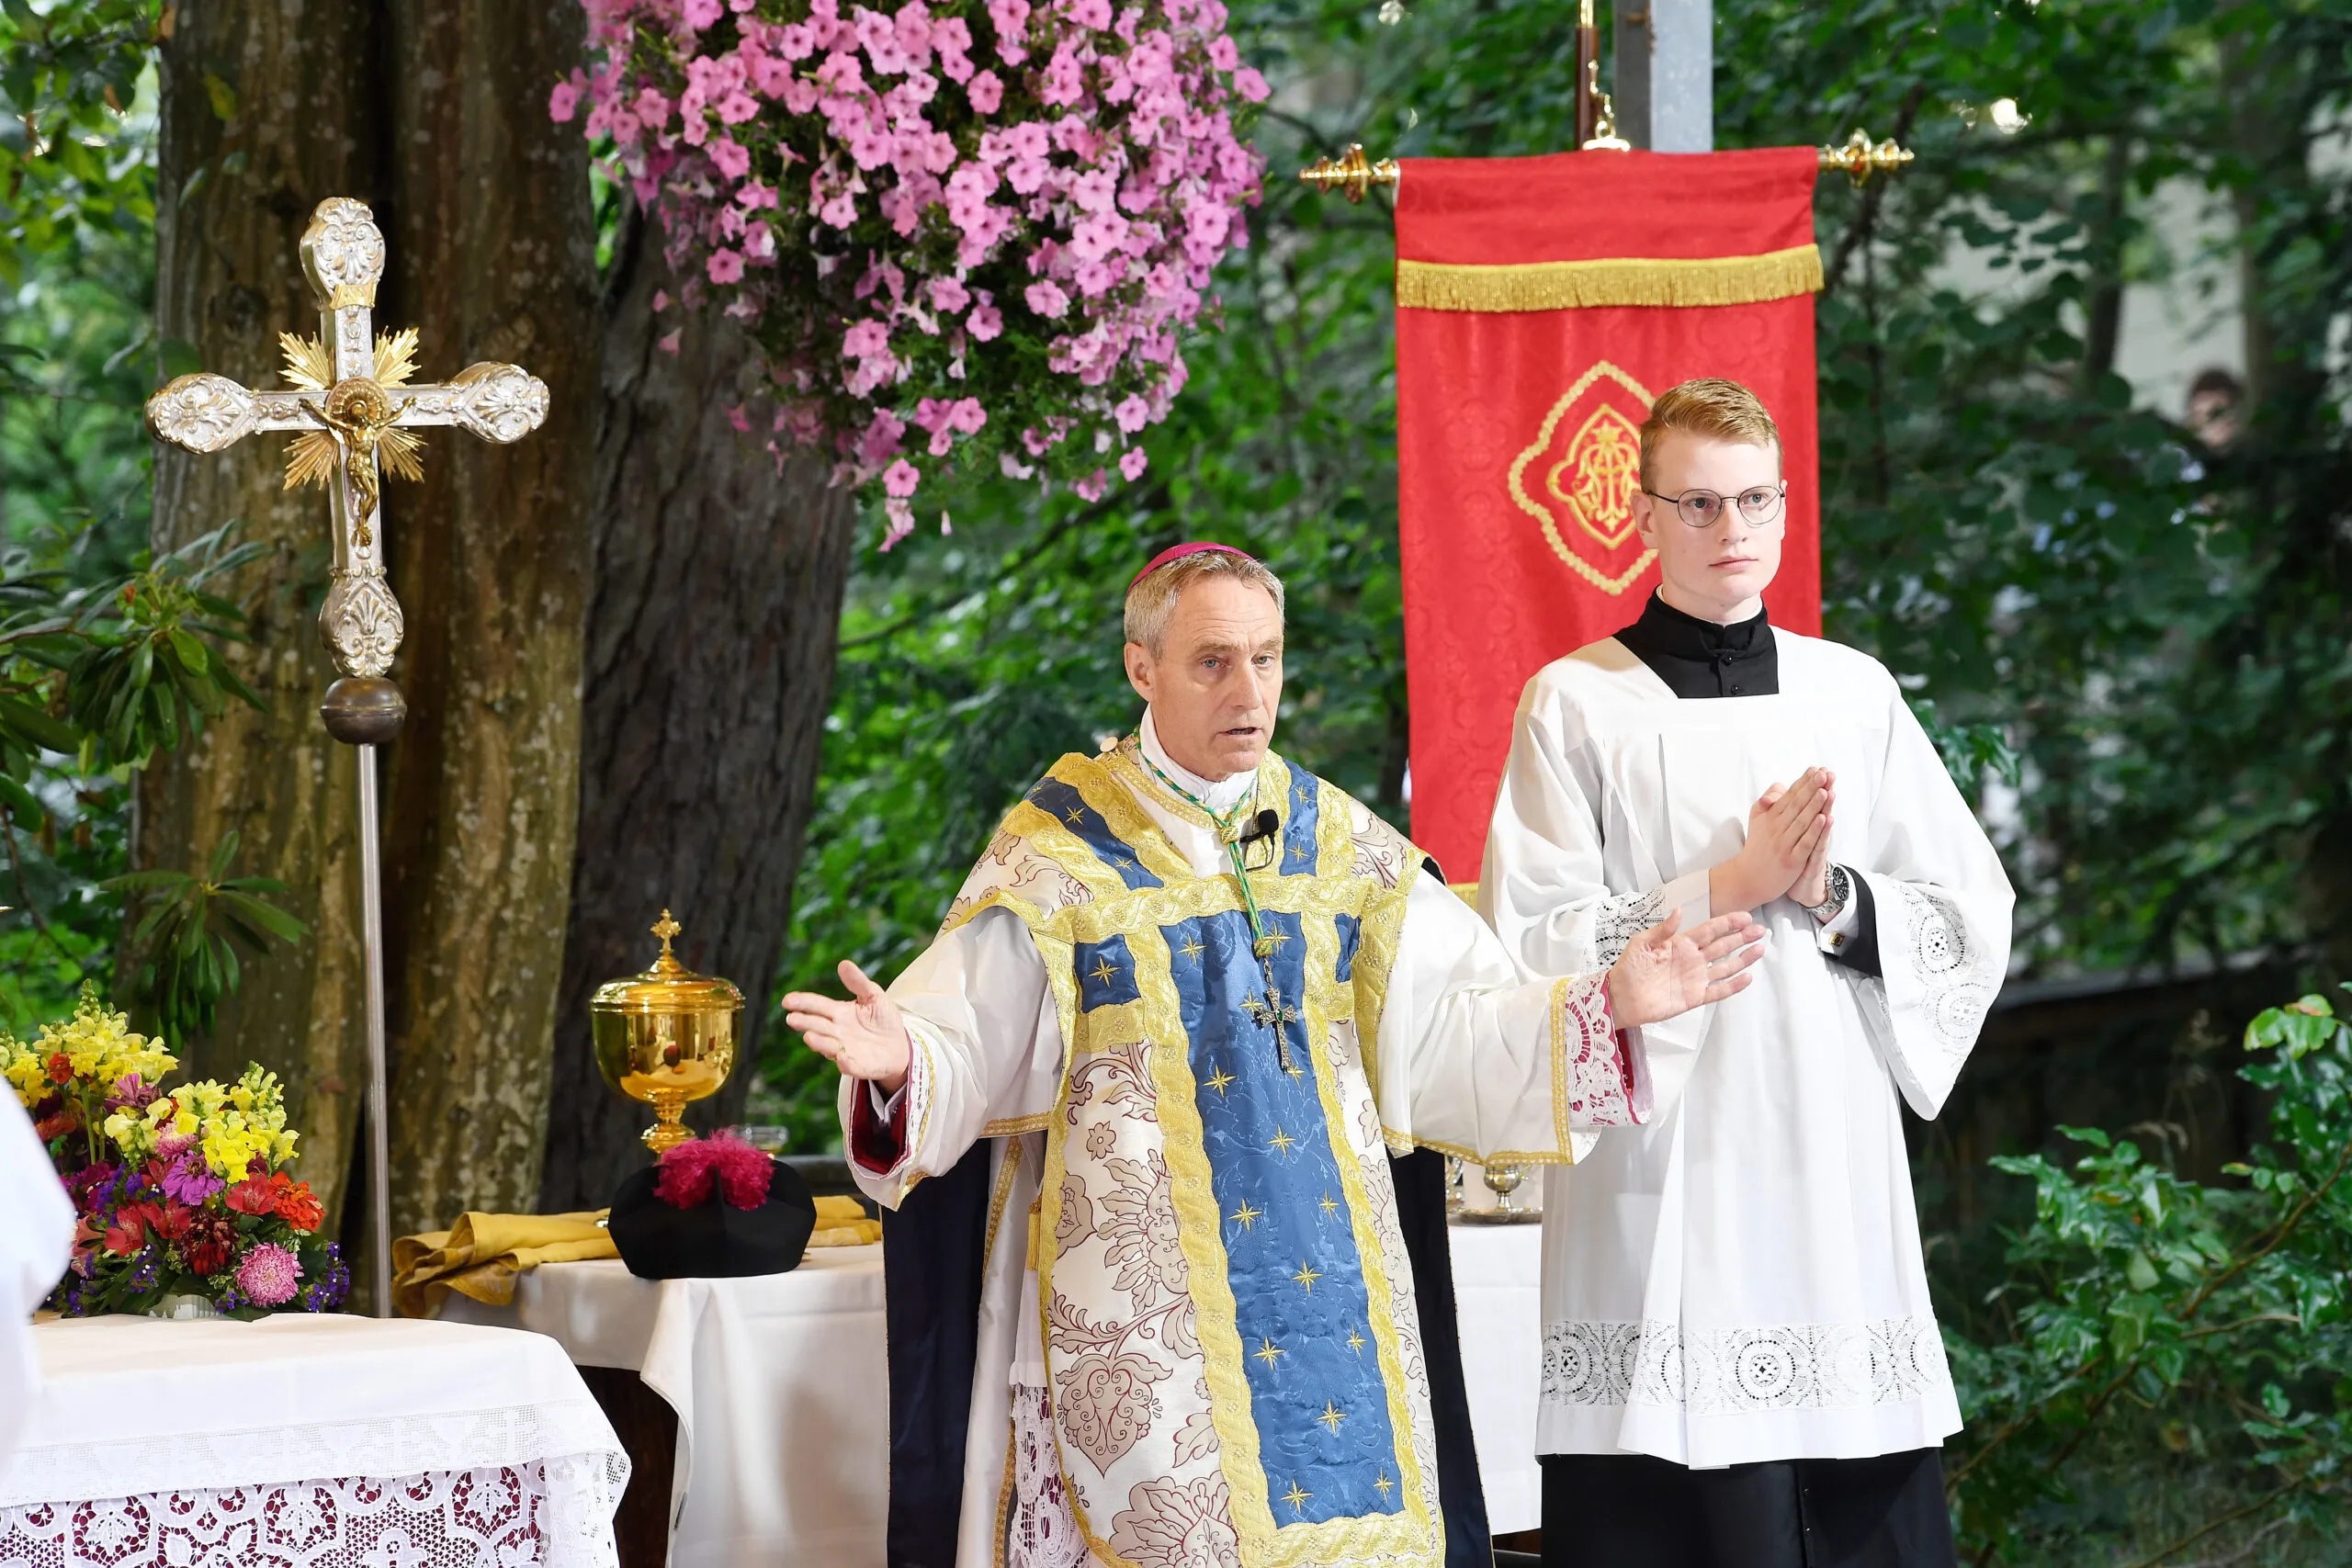 Archbishop Georg Gänswein, former prefect of the Papal Household, speaks at Maria Vesperbild in Bavaria, Germany, on the solemnity of the Assumption of Mary, Aug. 15, 2023.?w=200&h=150